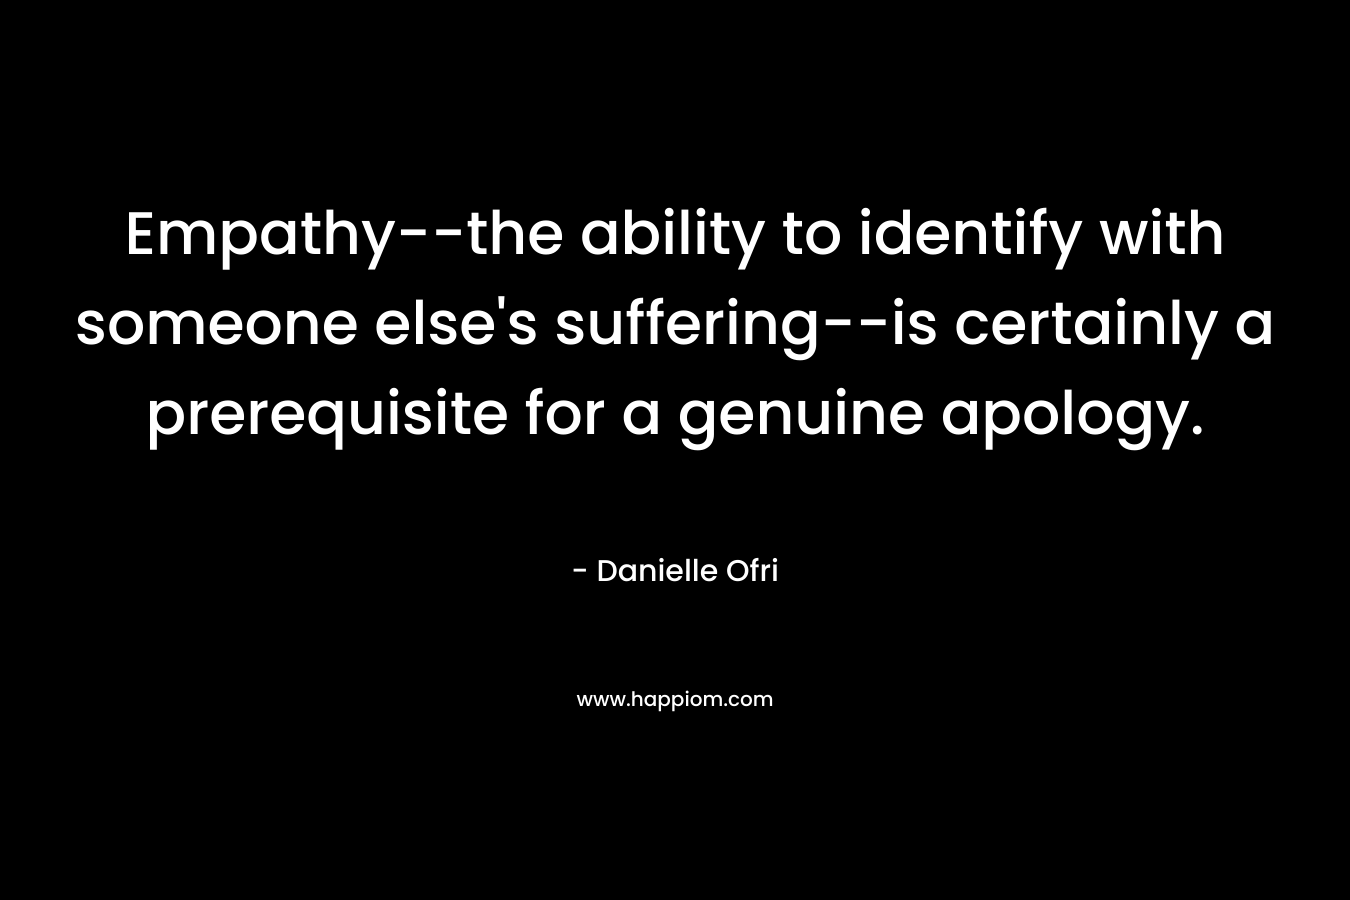 Empathy--the ability to identify with someone else's suffering--is certainly a prerequisite for a genuine apology.